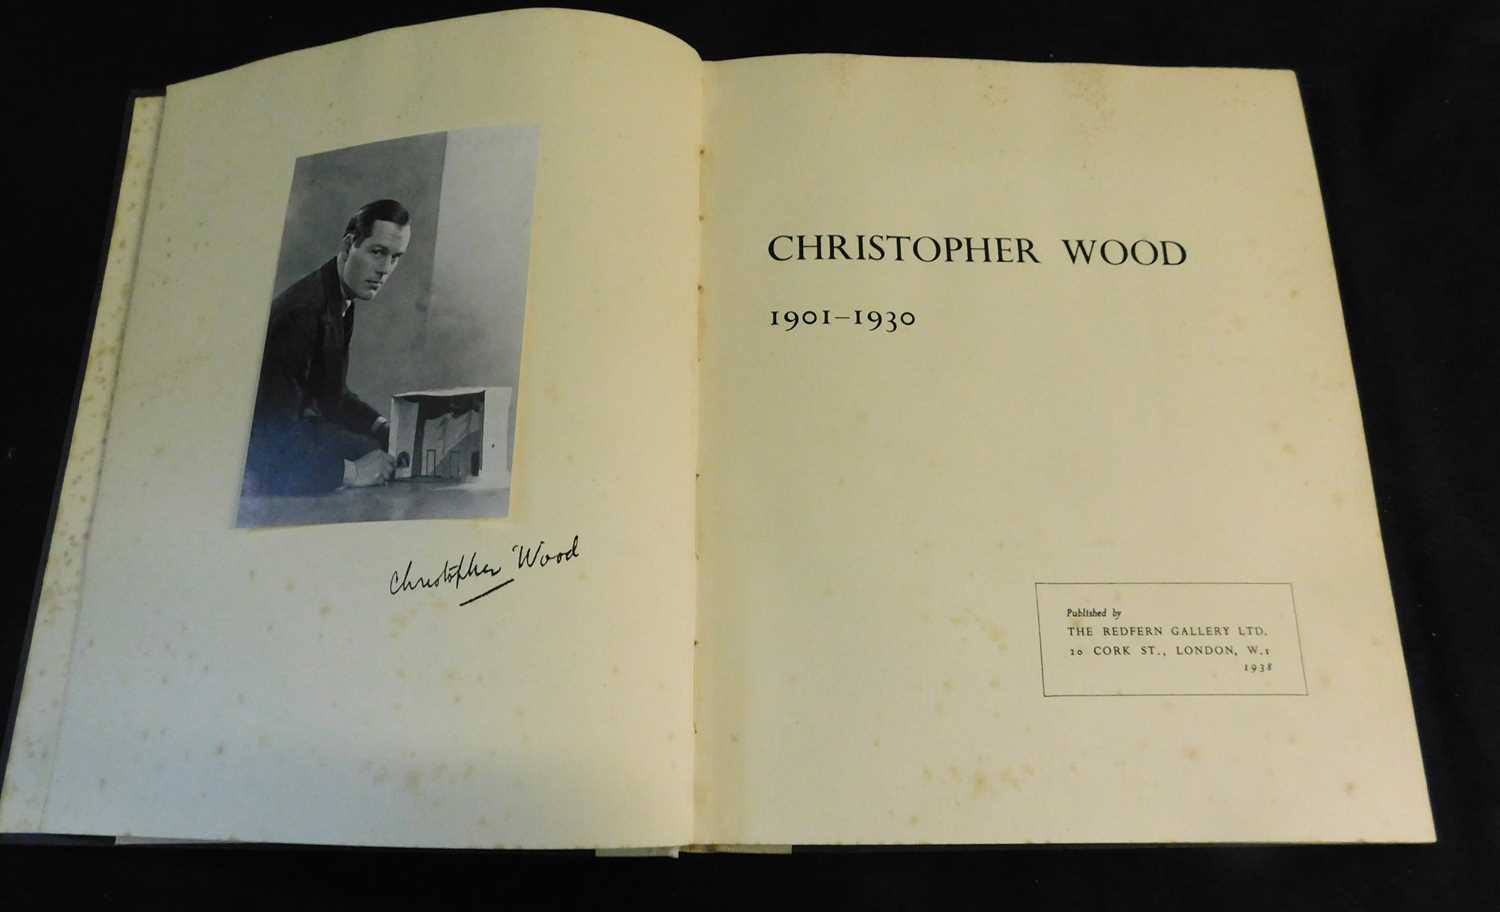 CHRISTOPHER WOOD 1901-1930, London, The Redfern Gallery, 1938, 1st edition, 4to, original cloth